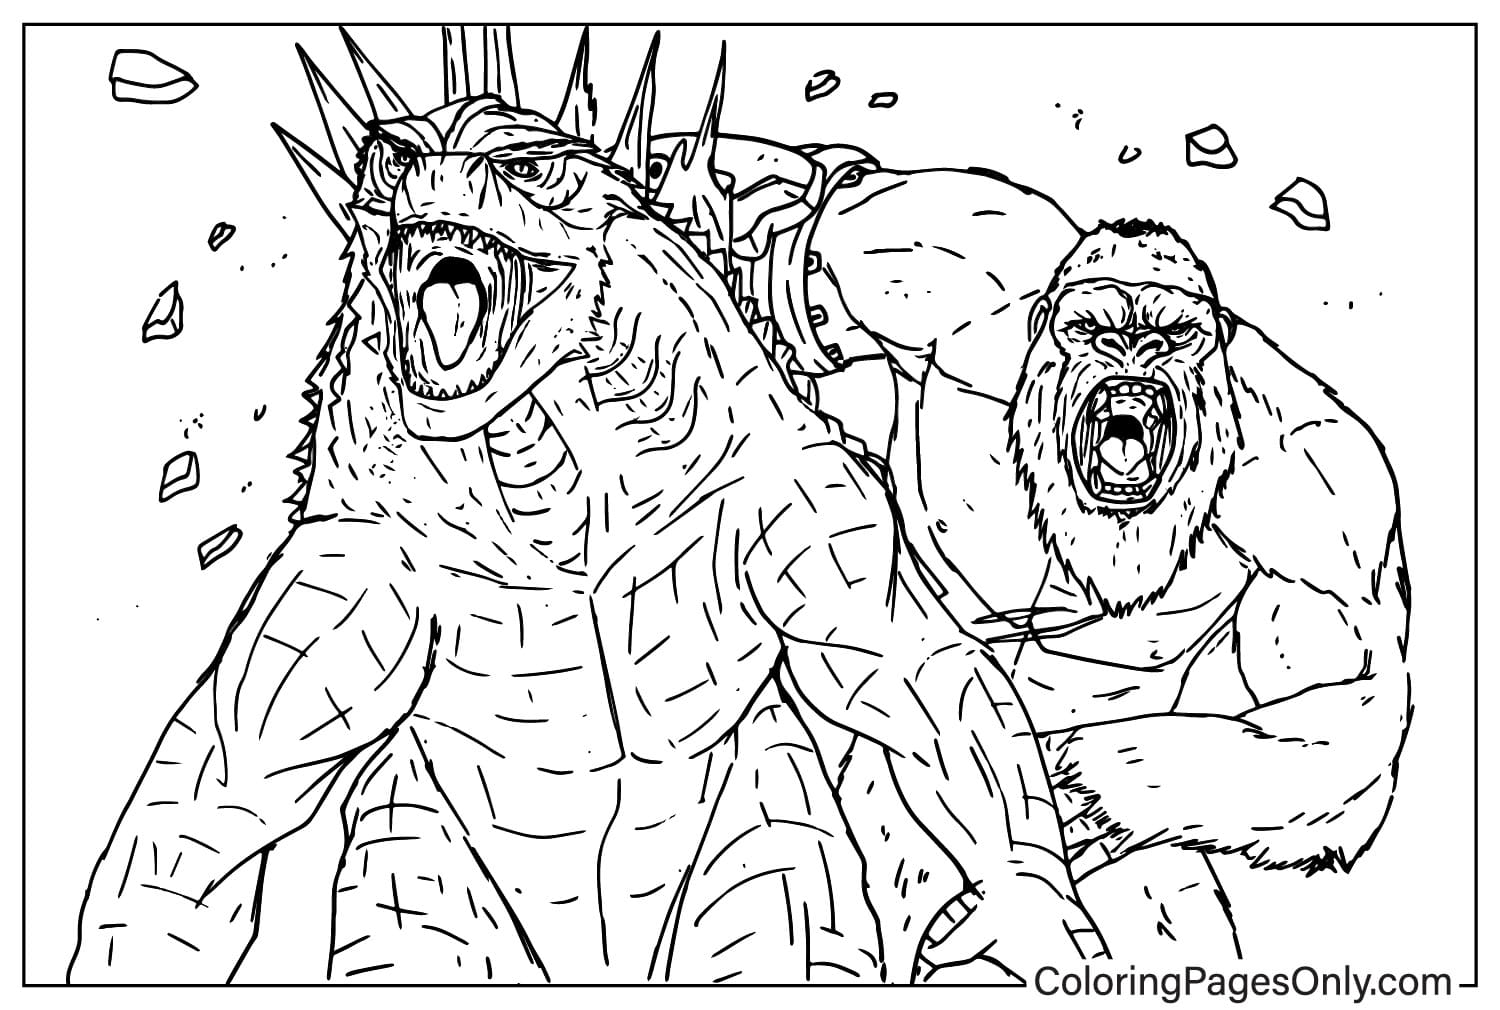 Godzilla x Kong- The New Empire Images to Color from Godzilla x Kong: The New Empire